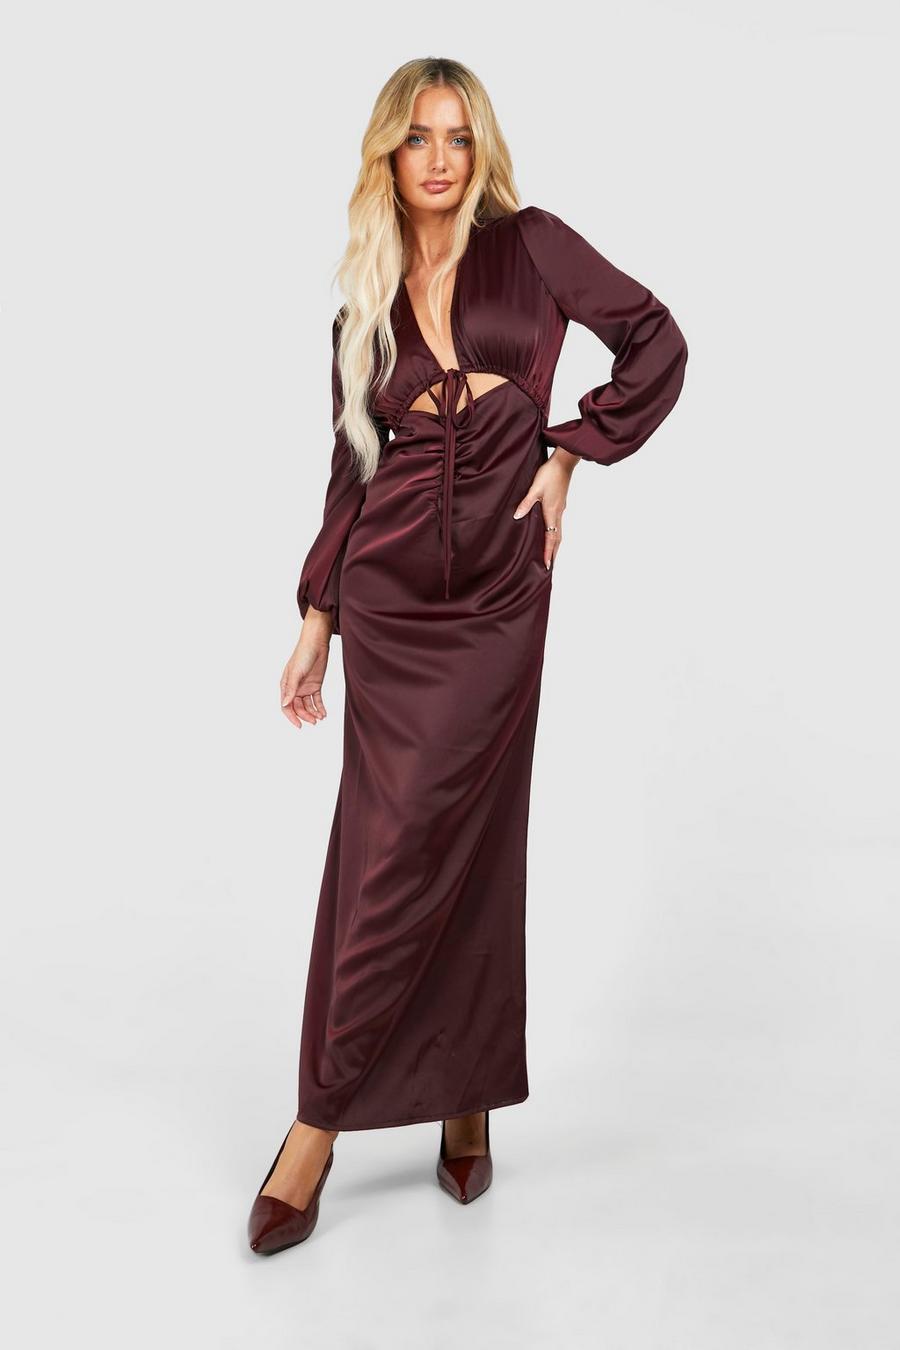 Chocolate Satin Rouched Cut Out Maxi Dress